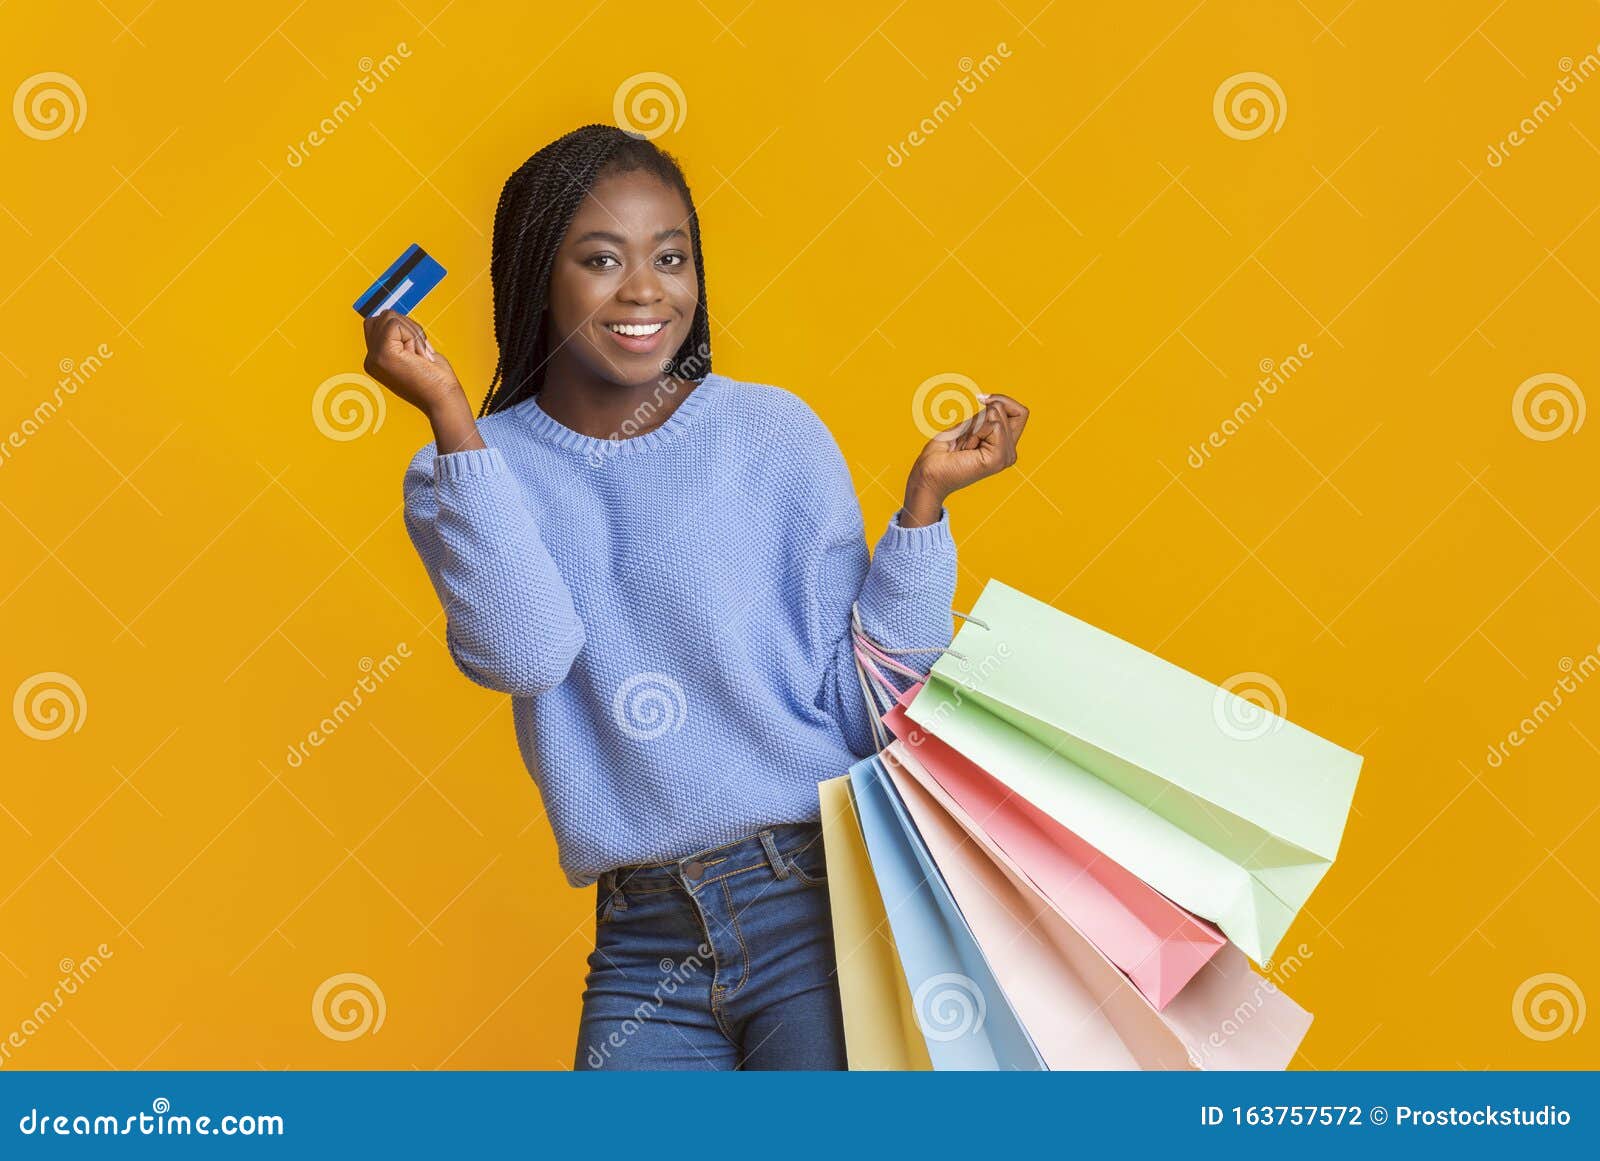 Happy Black Girl Recommending Credit Card, Holding Shopping Bags Stock ...